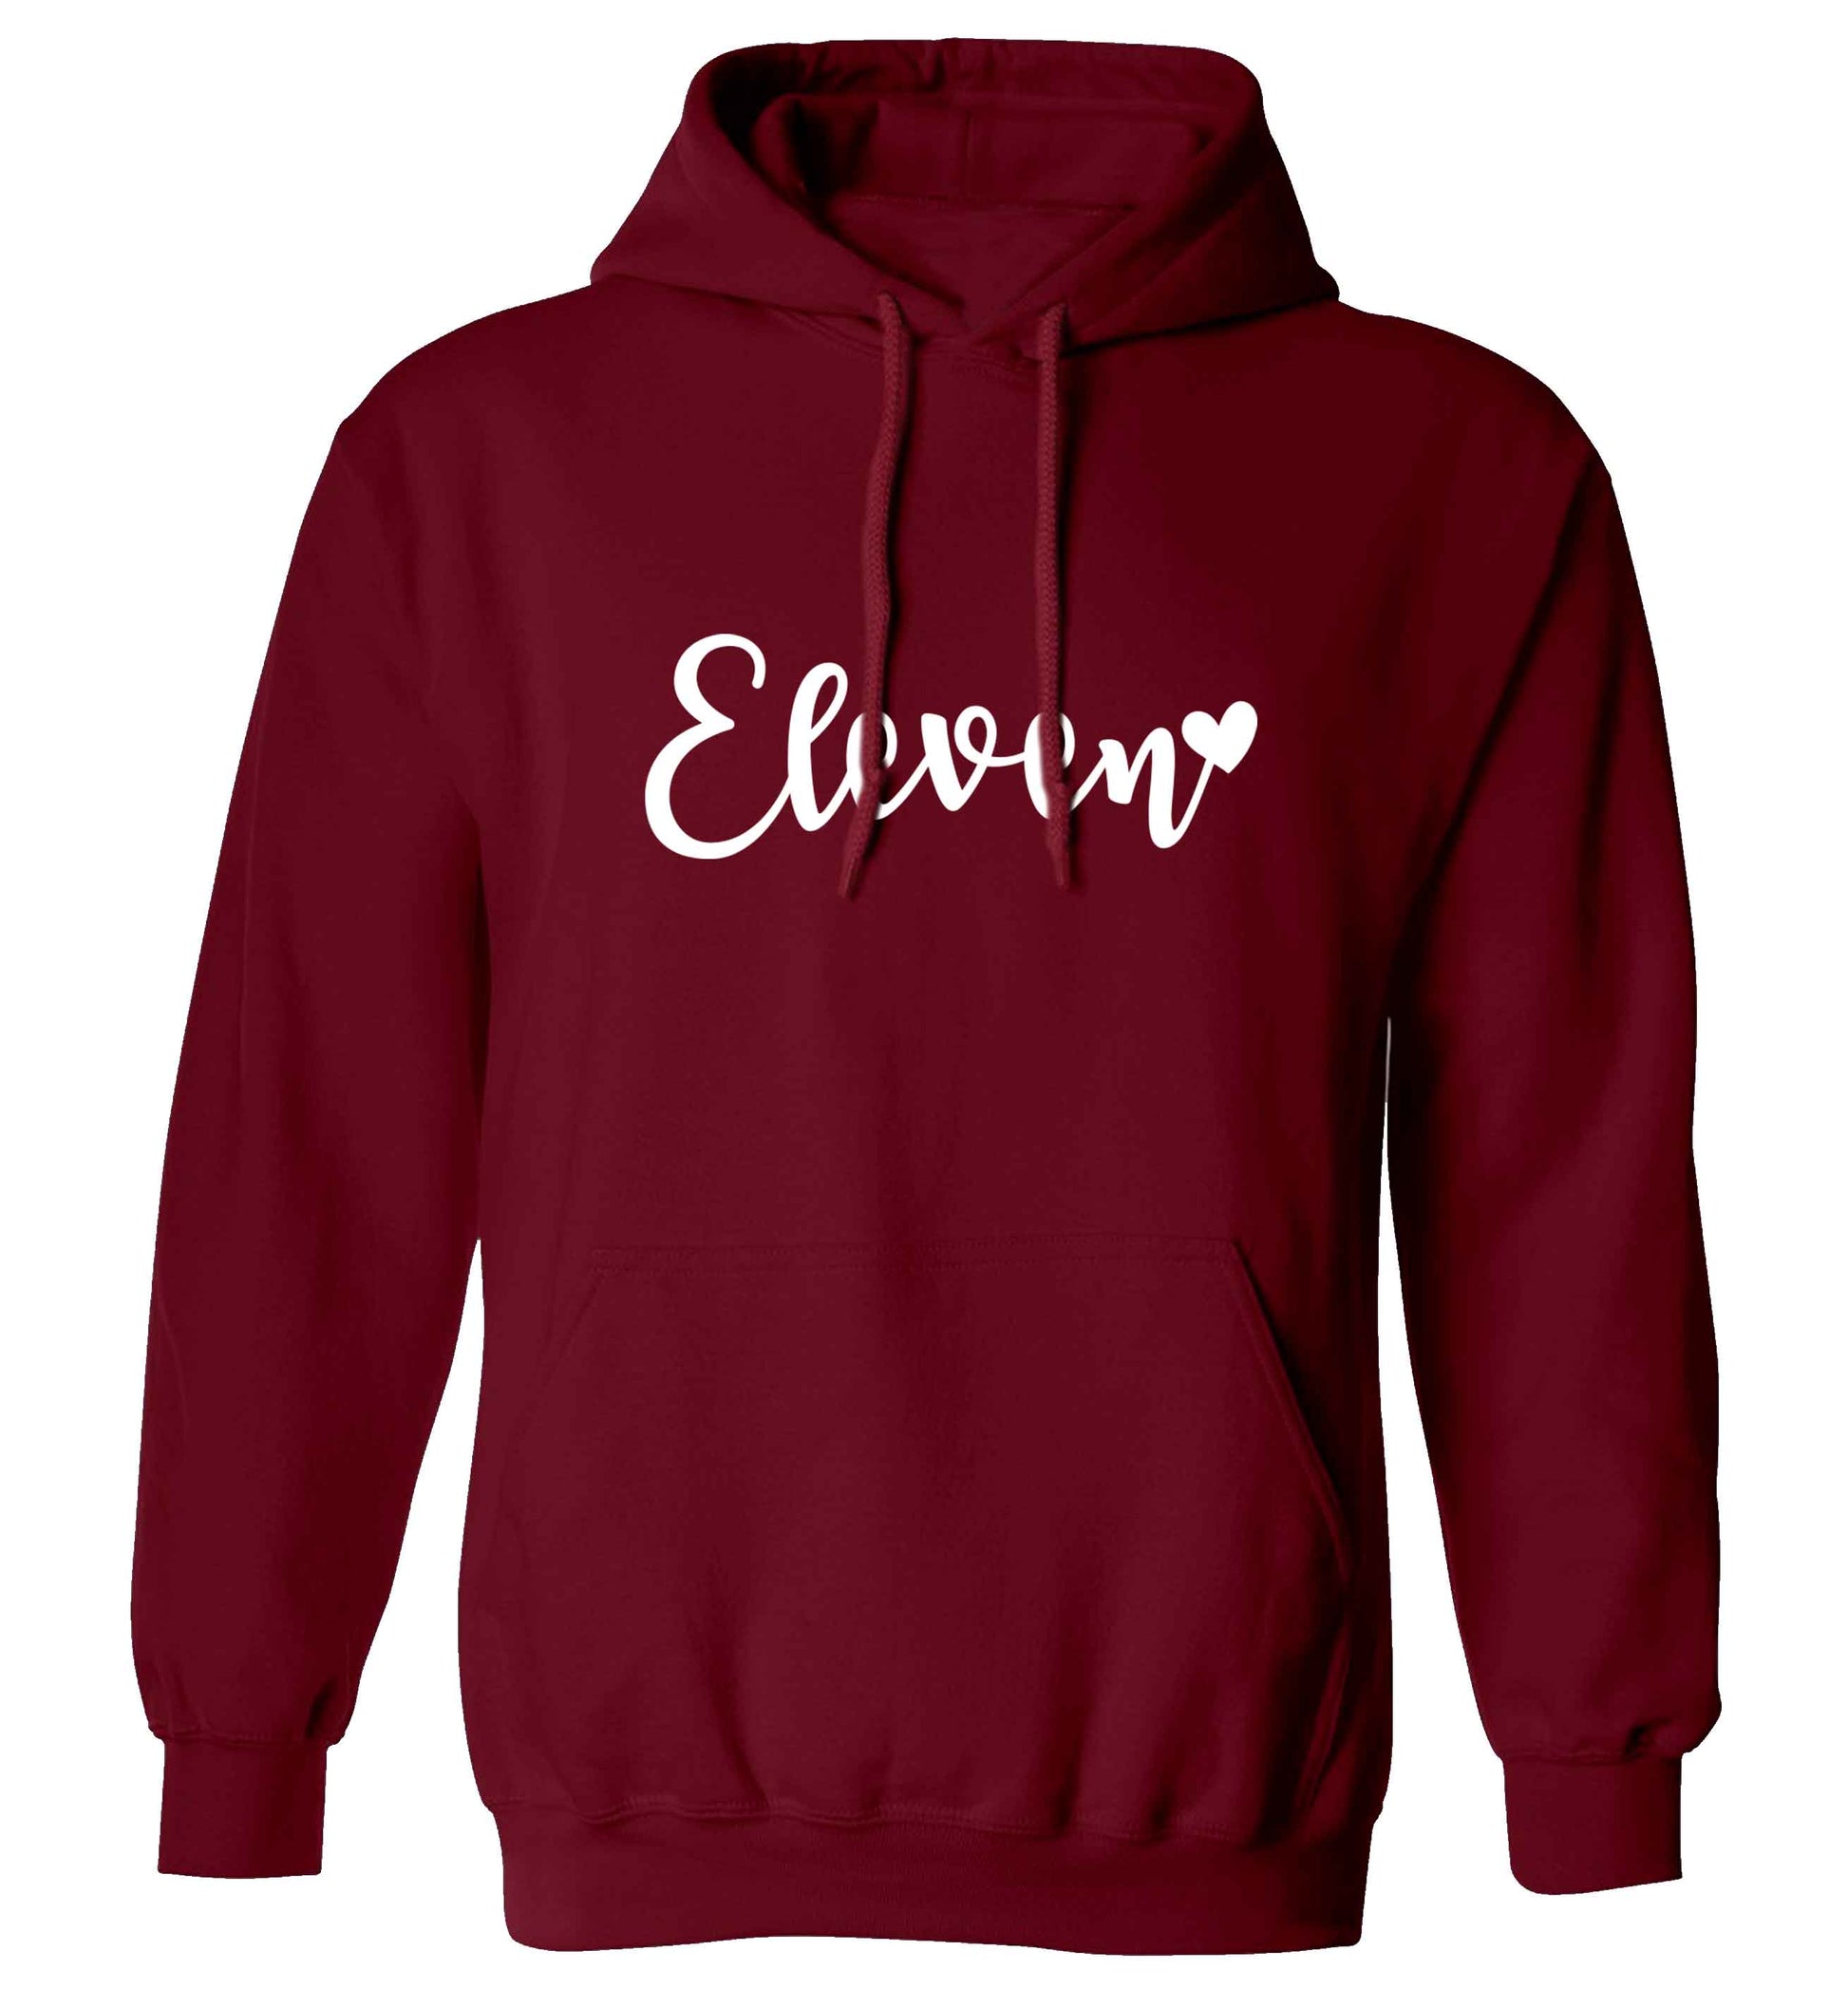 Eleven and heart! adults unisex maroon hoodie 2XL